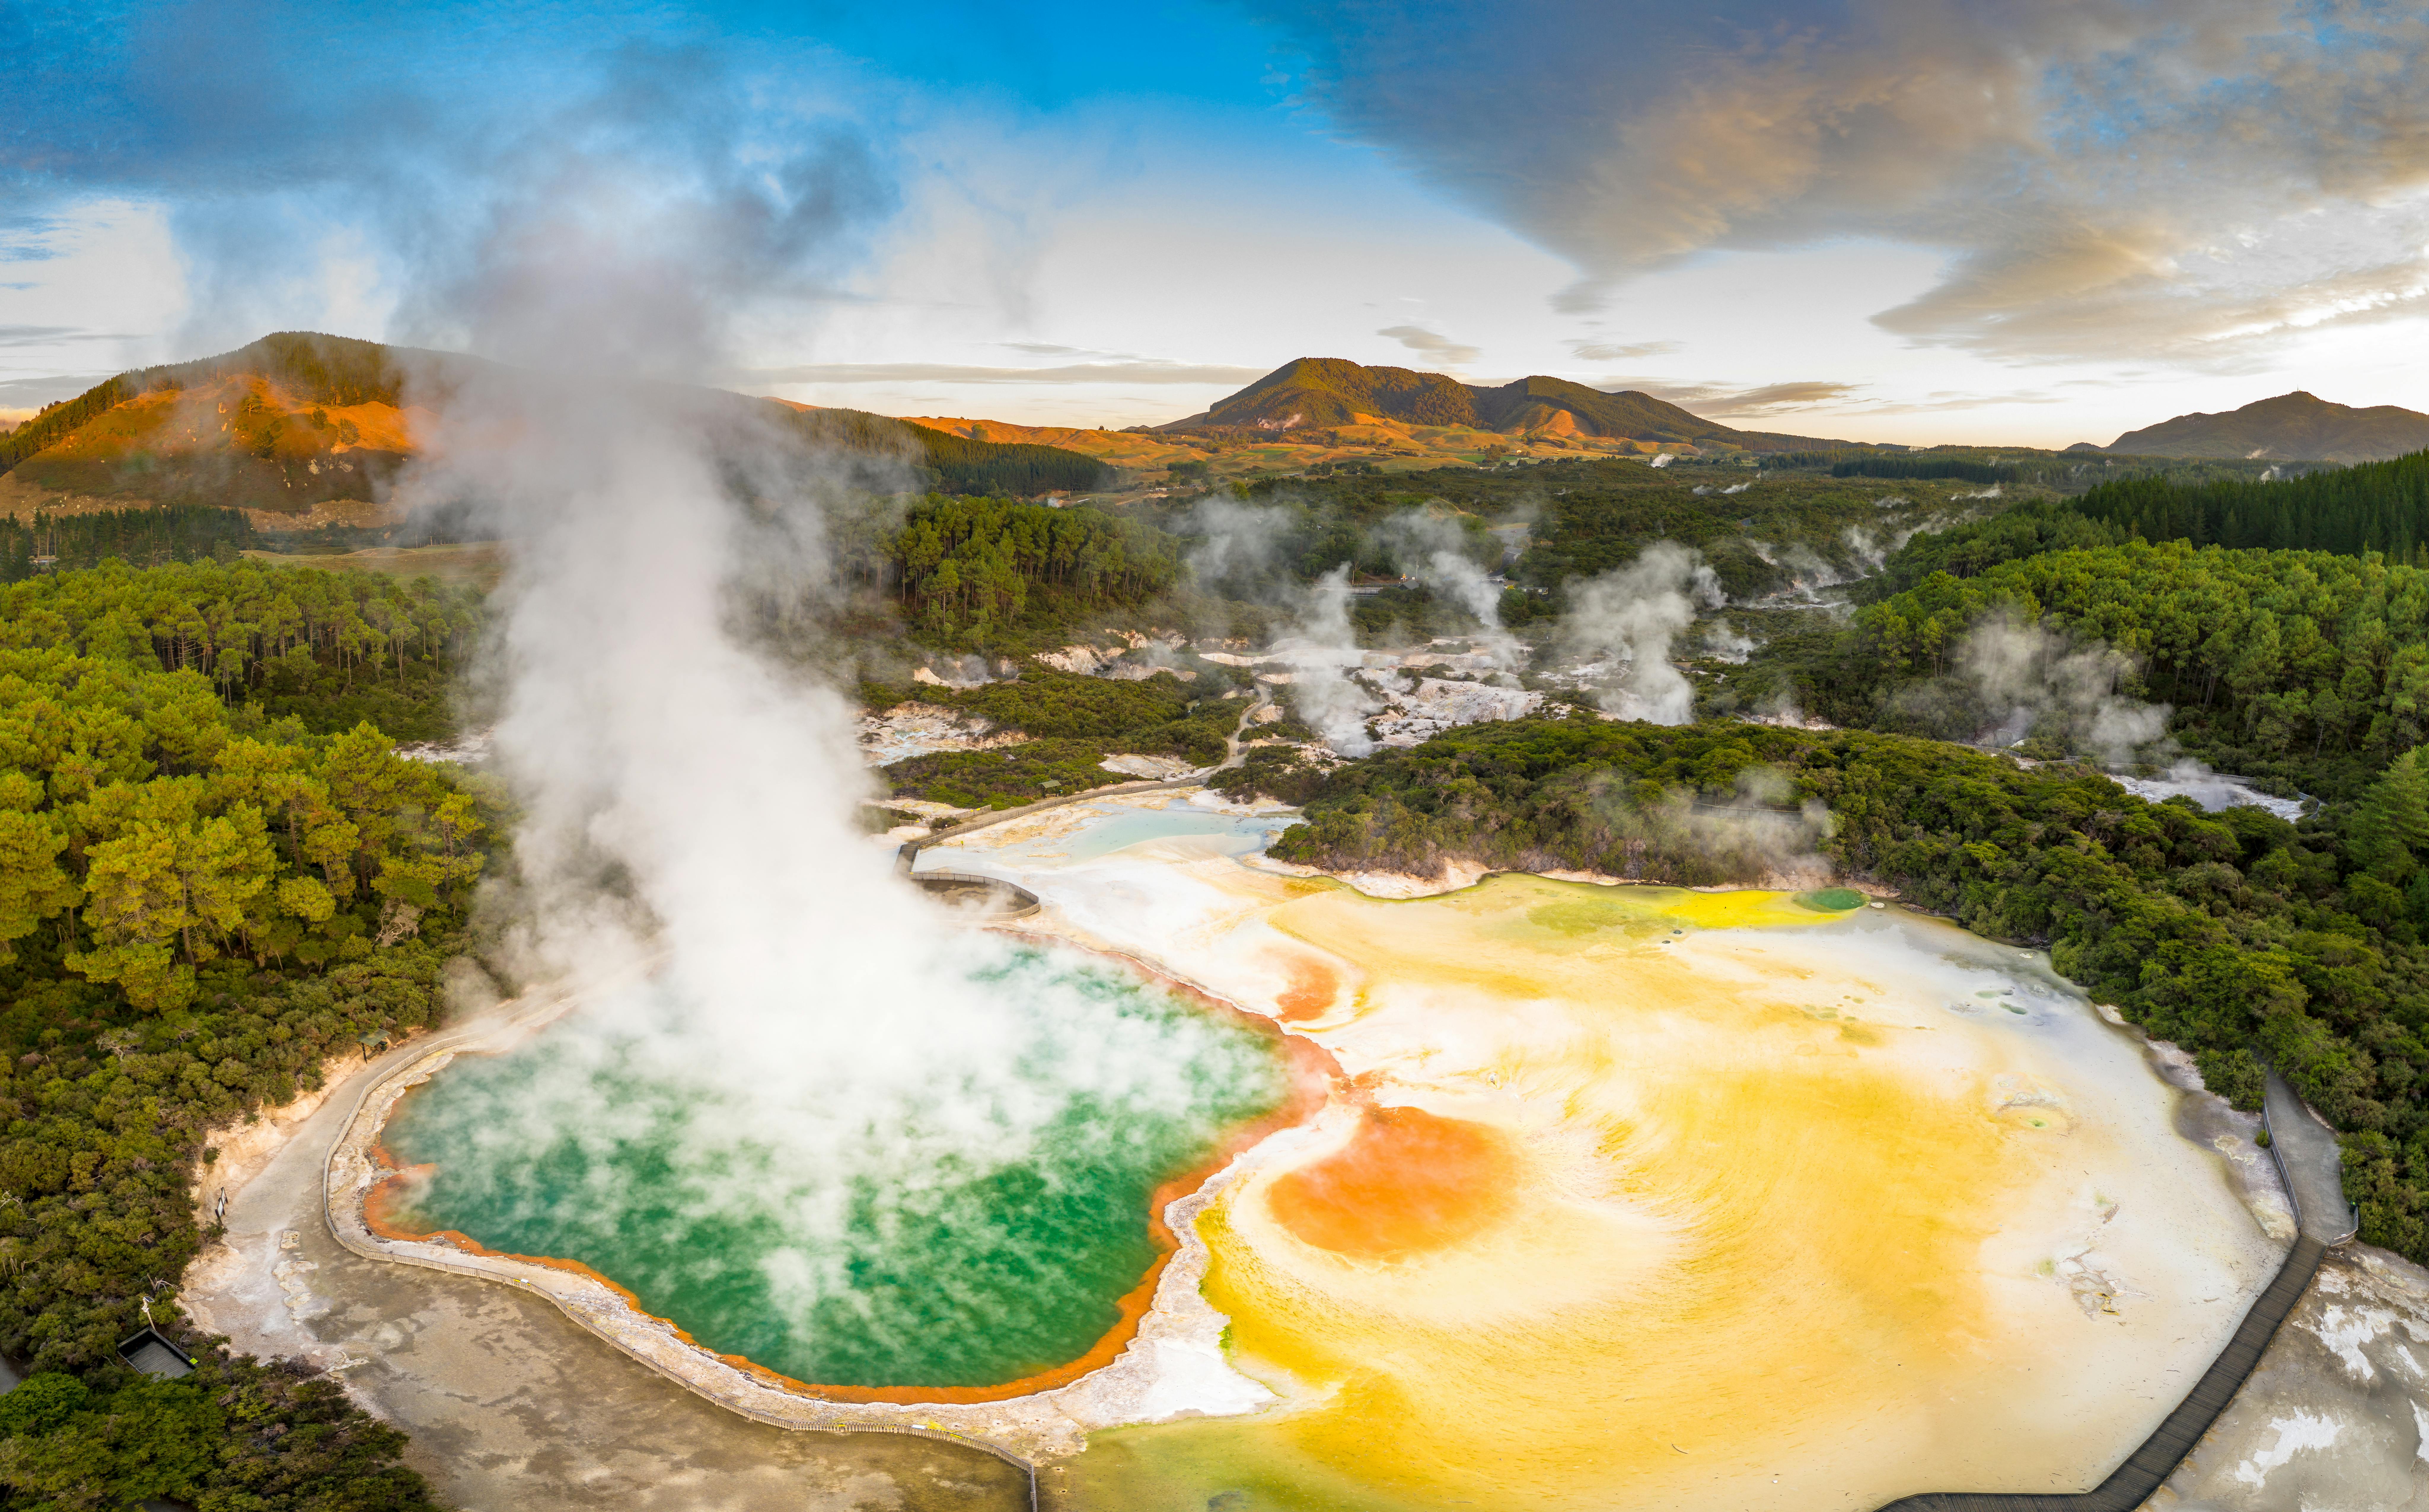 plan your trip around Rotorua of North Island in New Zealand, a must-do hike that active travelers will enjoy!